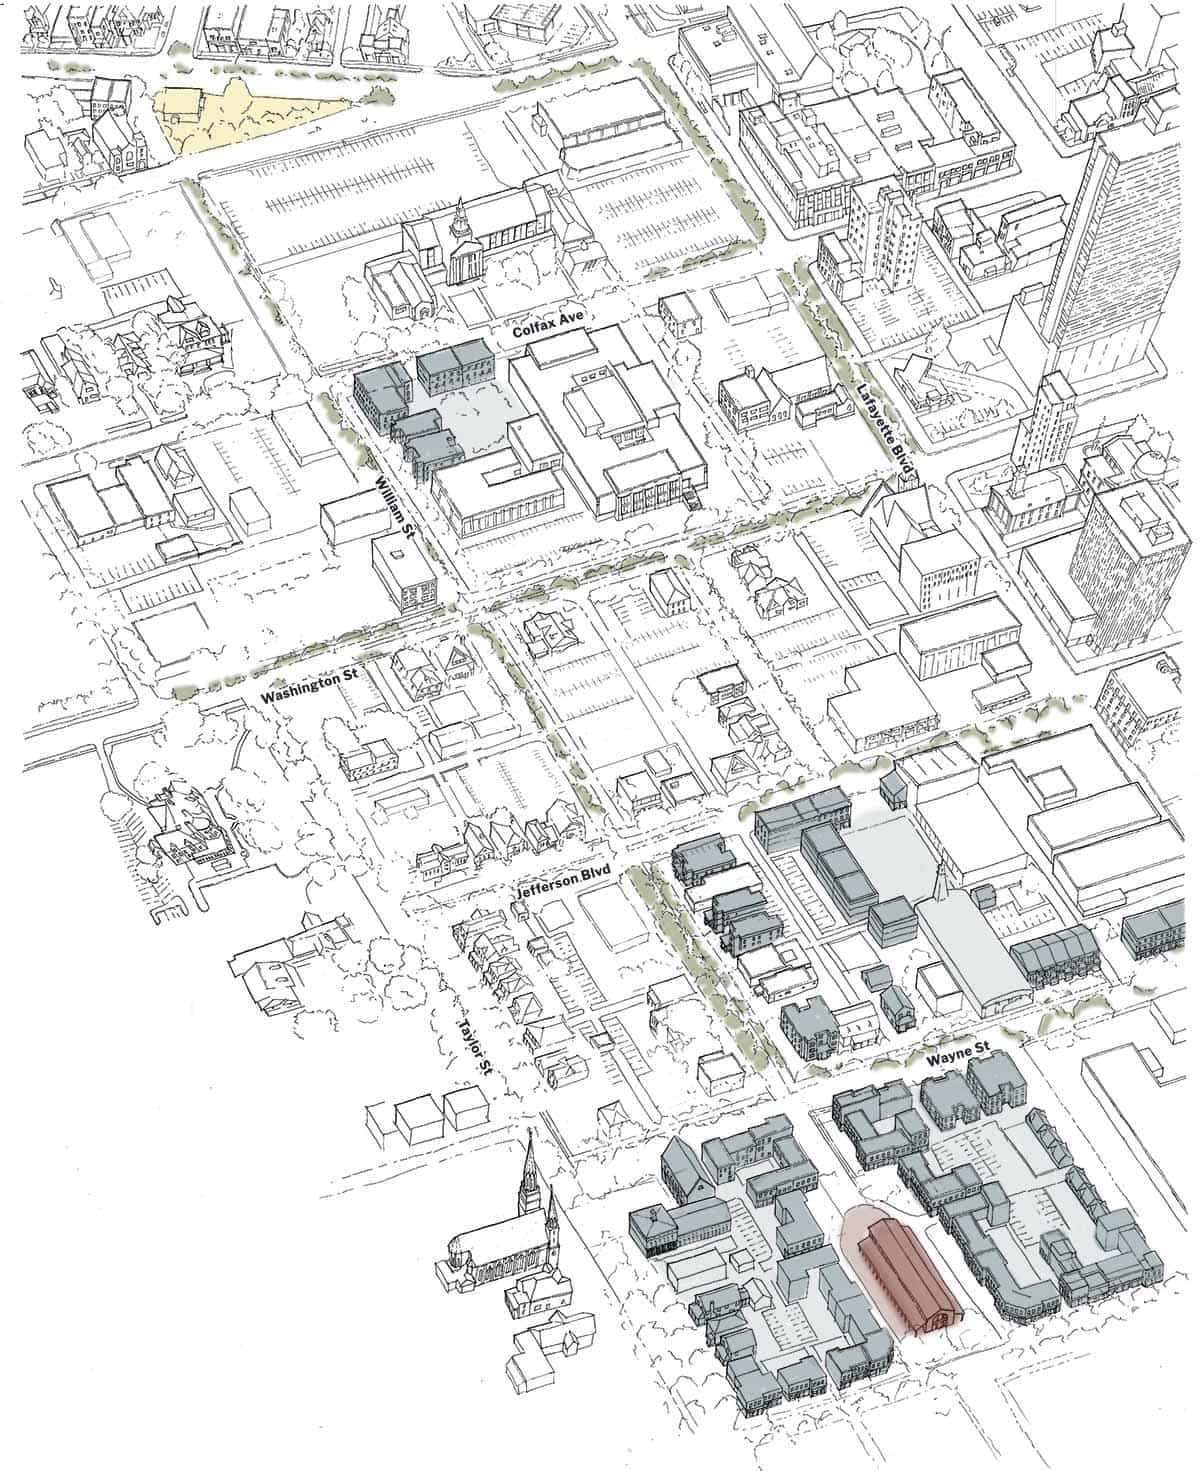 An aerial view drawing of South Bend highlighting a large market hall south of downtown.